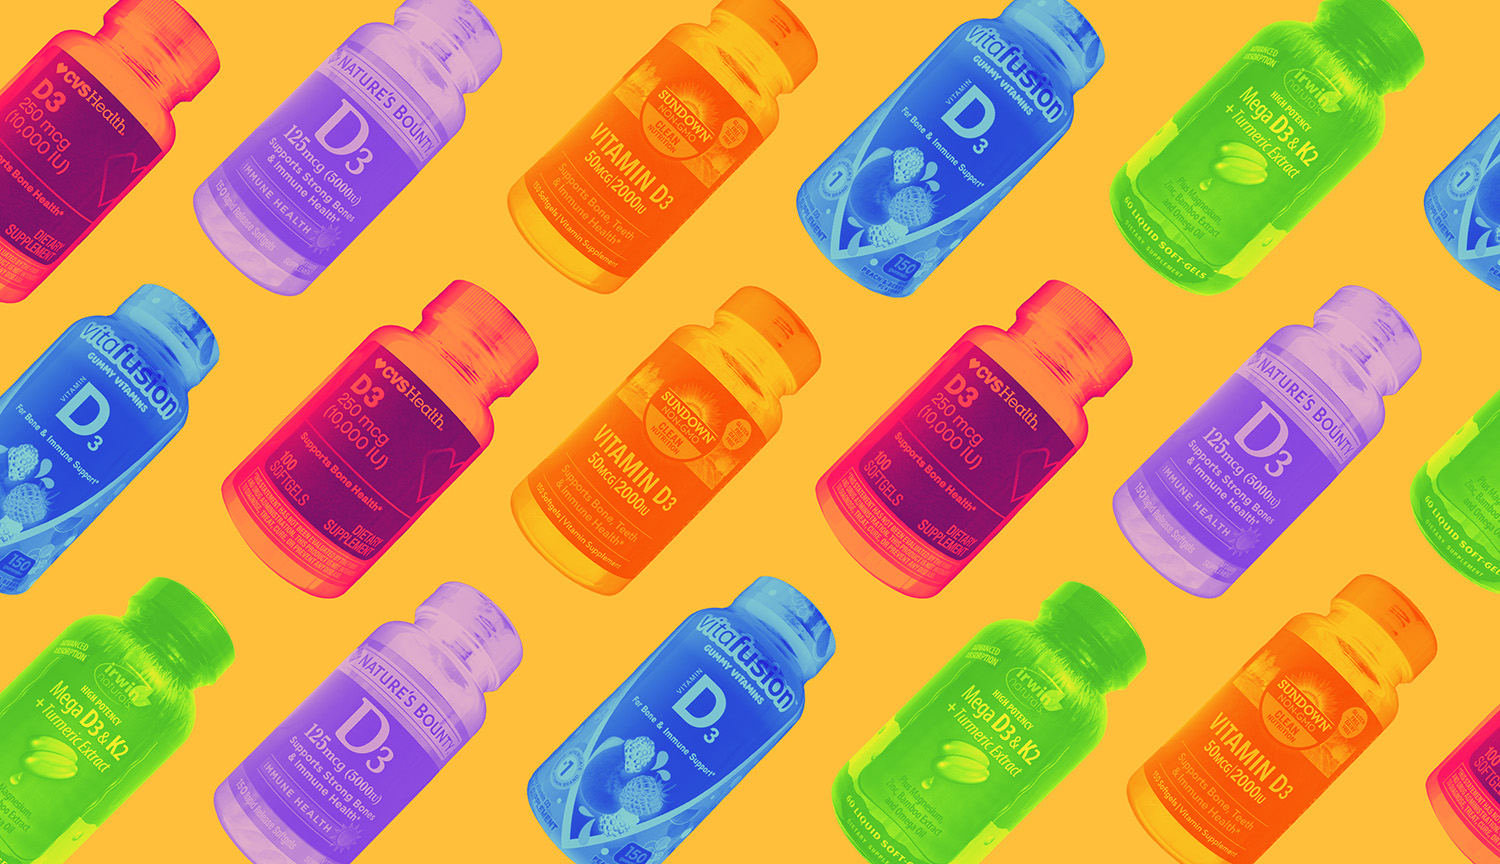 An array of bottles of vitamin D3 in bright colors on an orange background